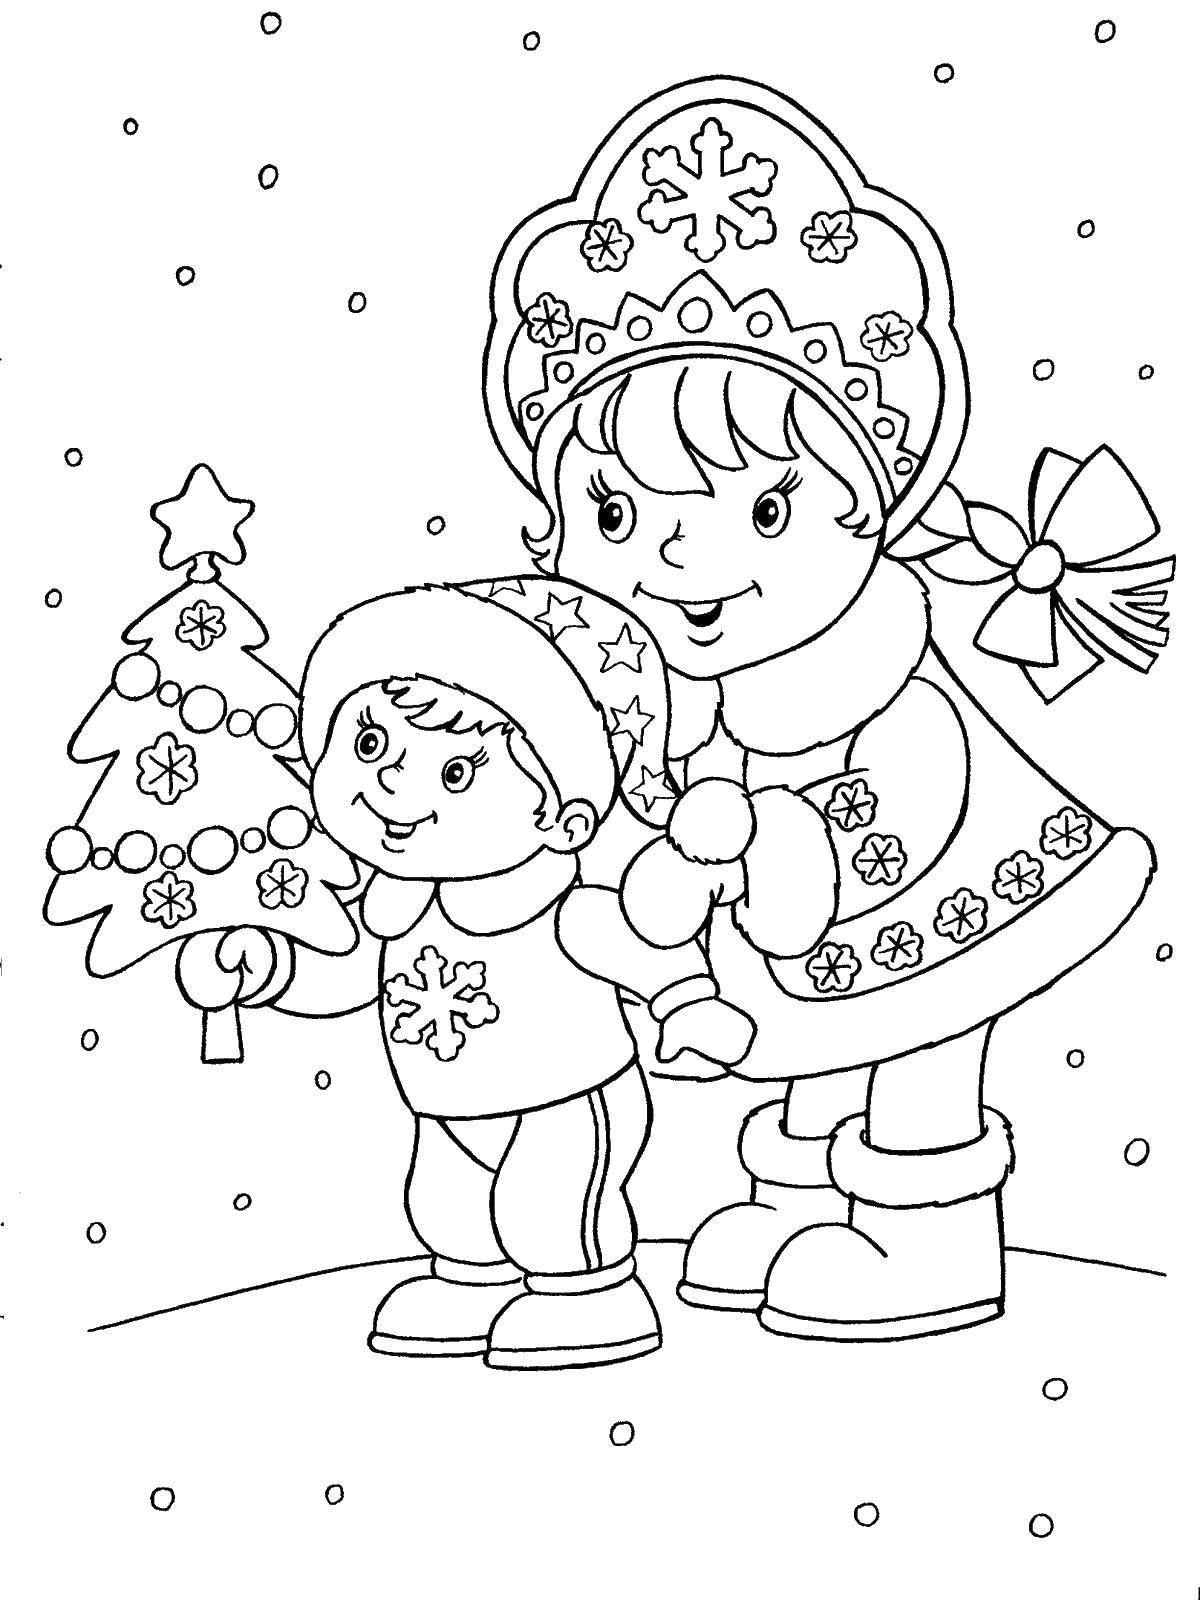 Coloring The snow maiden and the boy. Category Coloring pages for kids. Tags:  tree, boy, maiden.